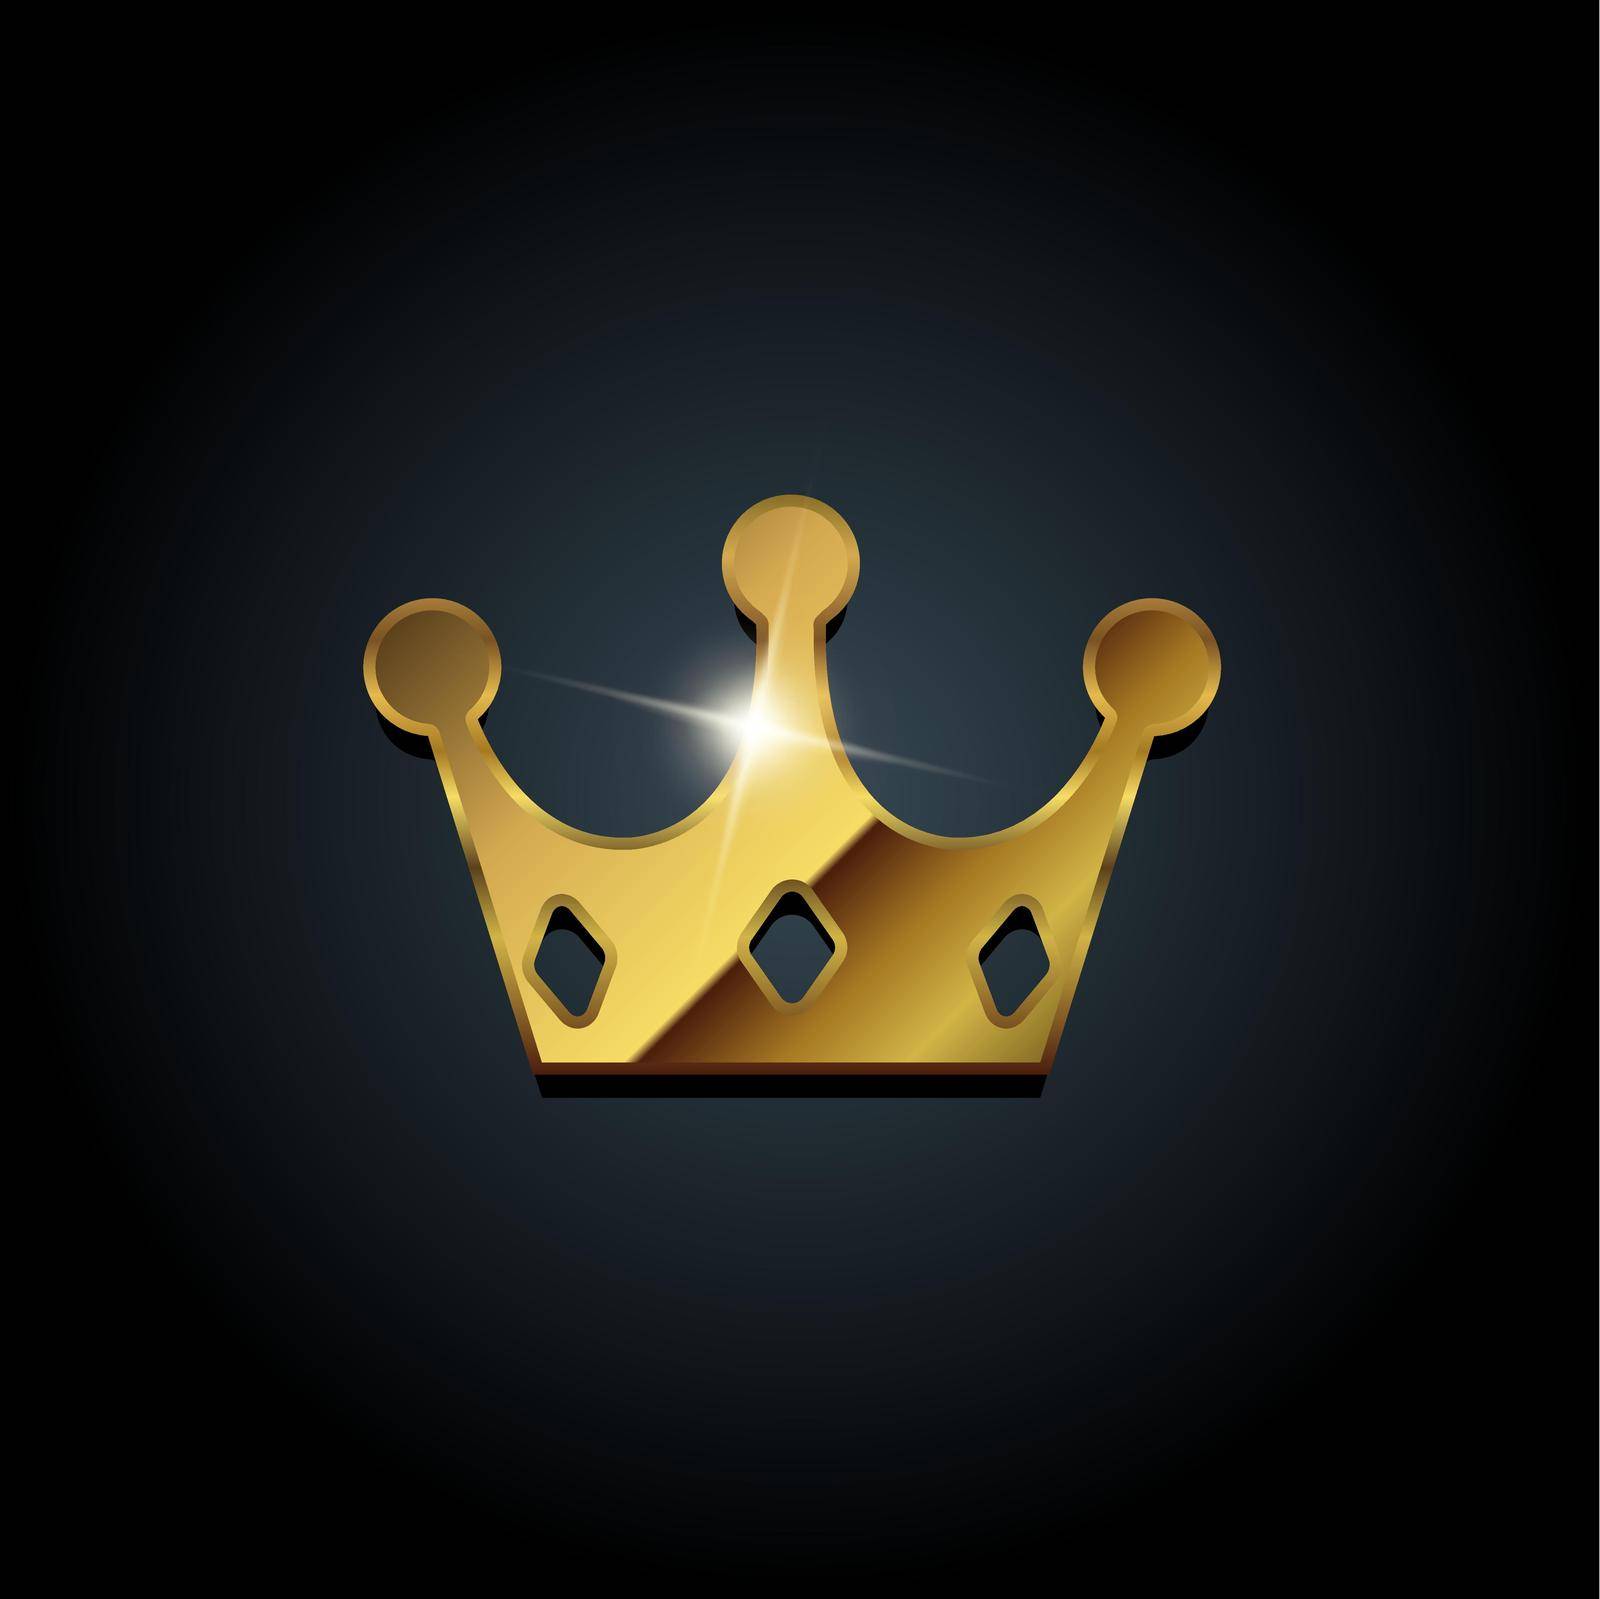 Golden metalic crown icon illustration by barks